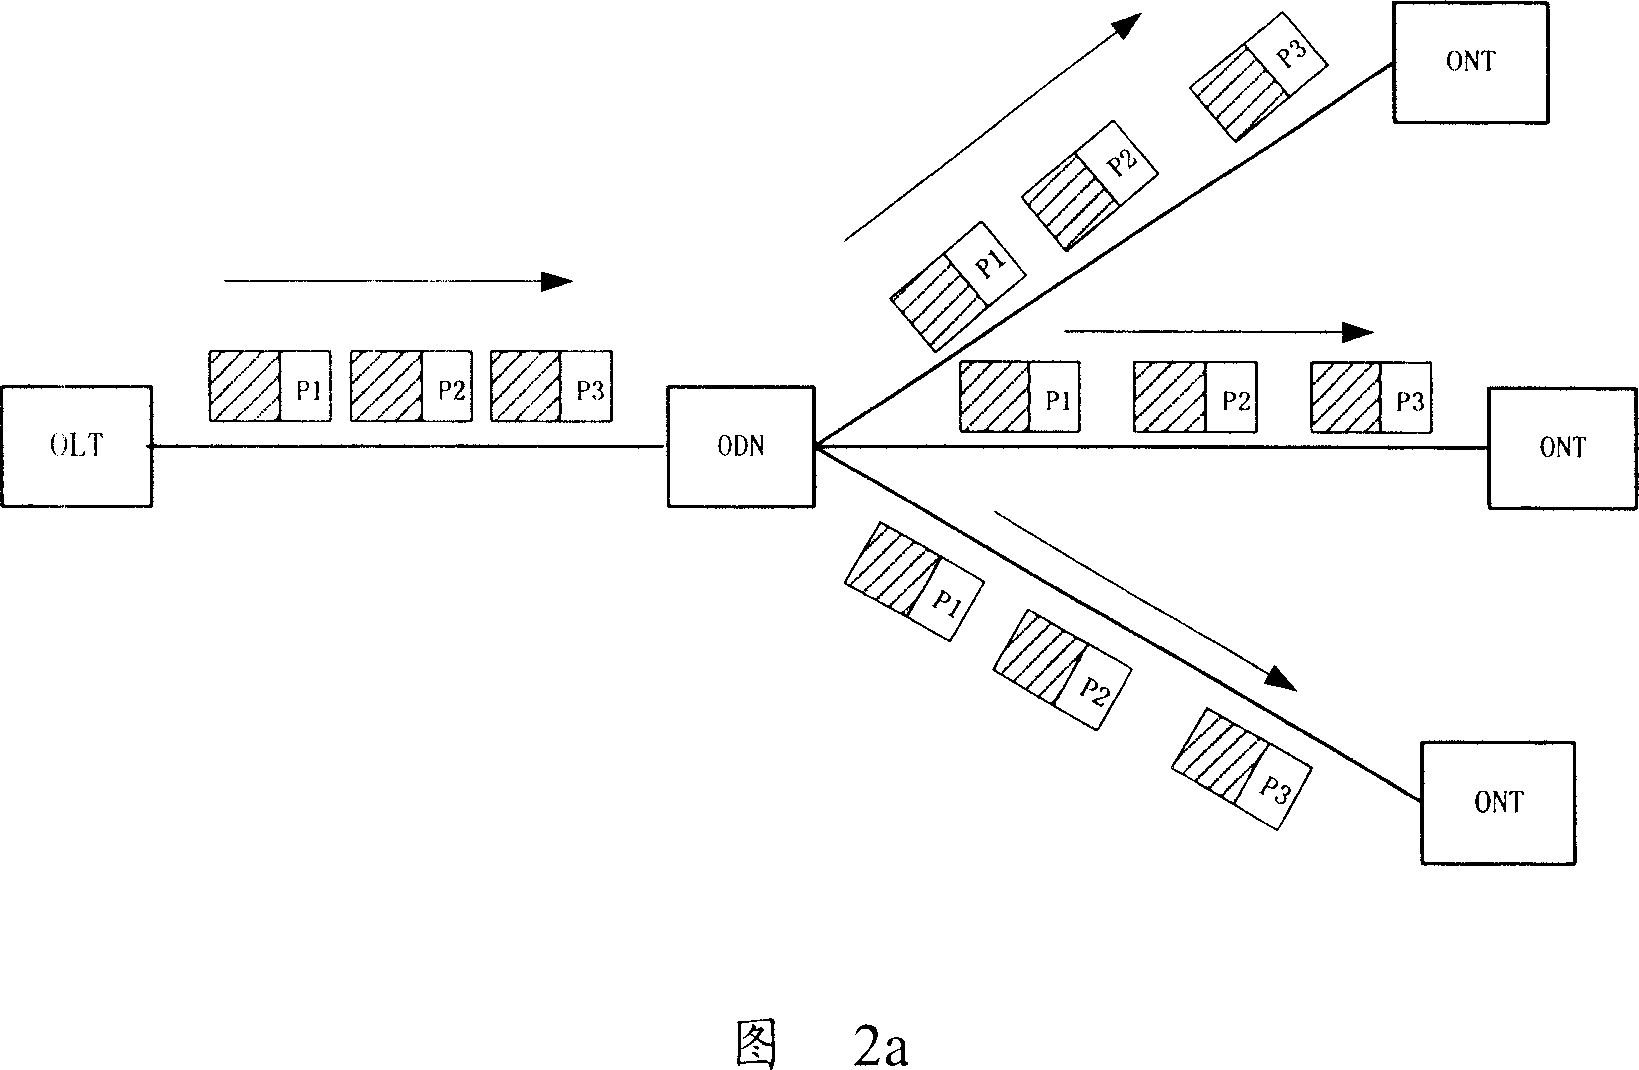 Method for transmitting uplink control packet in Gbit passive optical network system